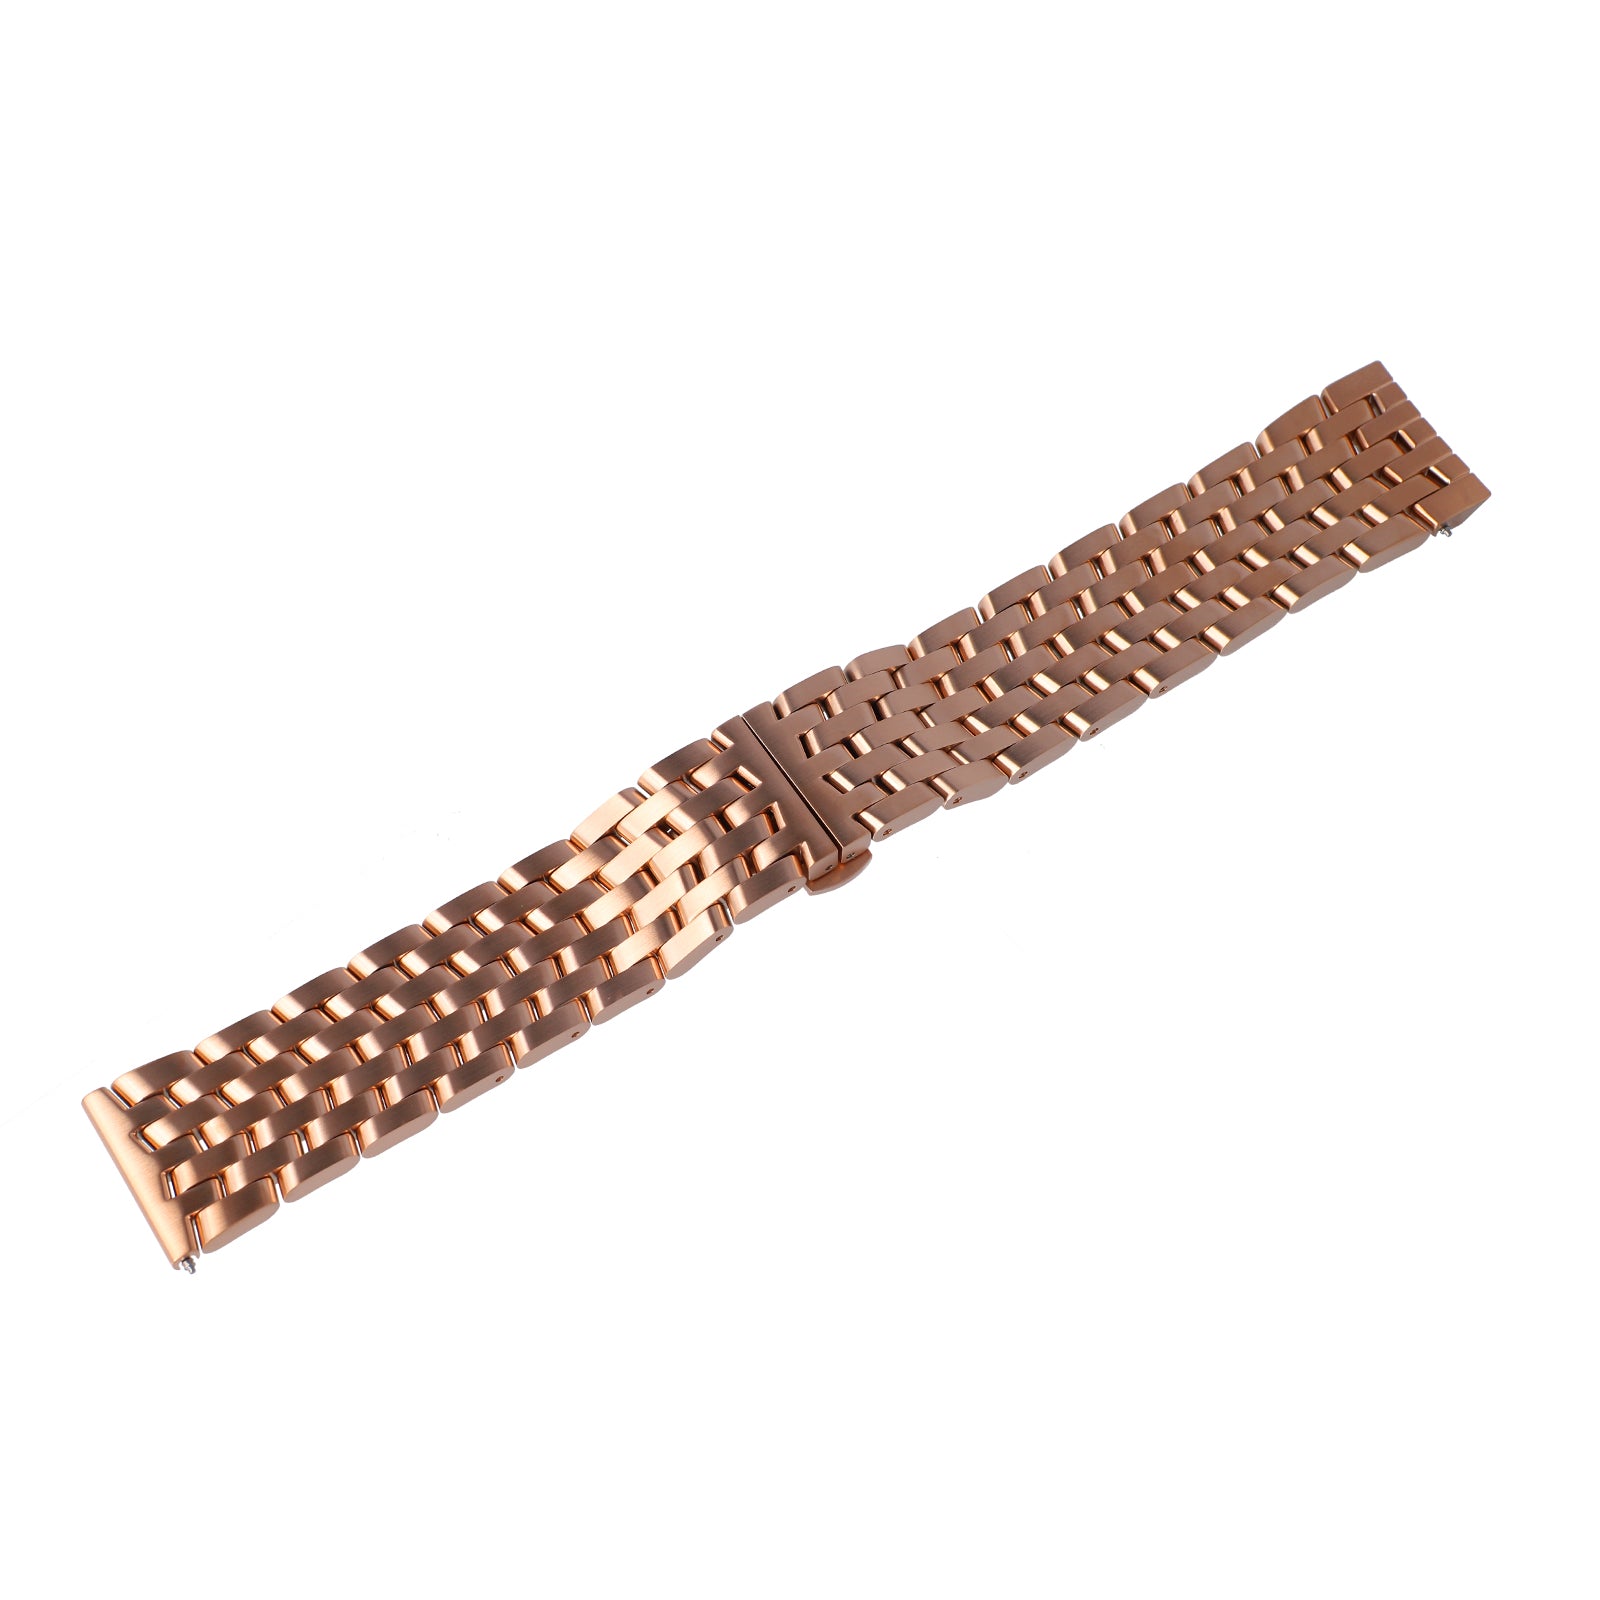 SYSTEMA PERIODICUM ROSEGOLD PVD STAINLESS STEEL BRACELET